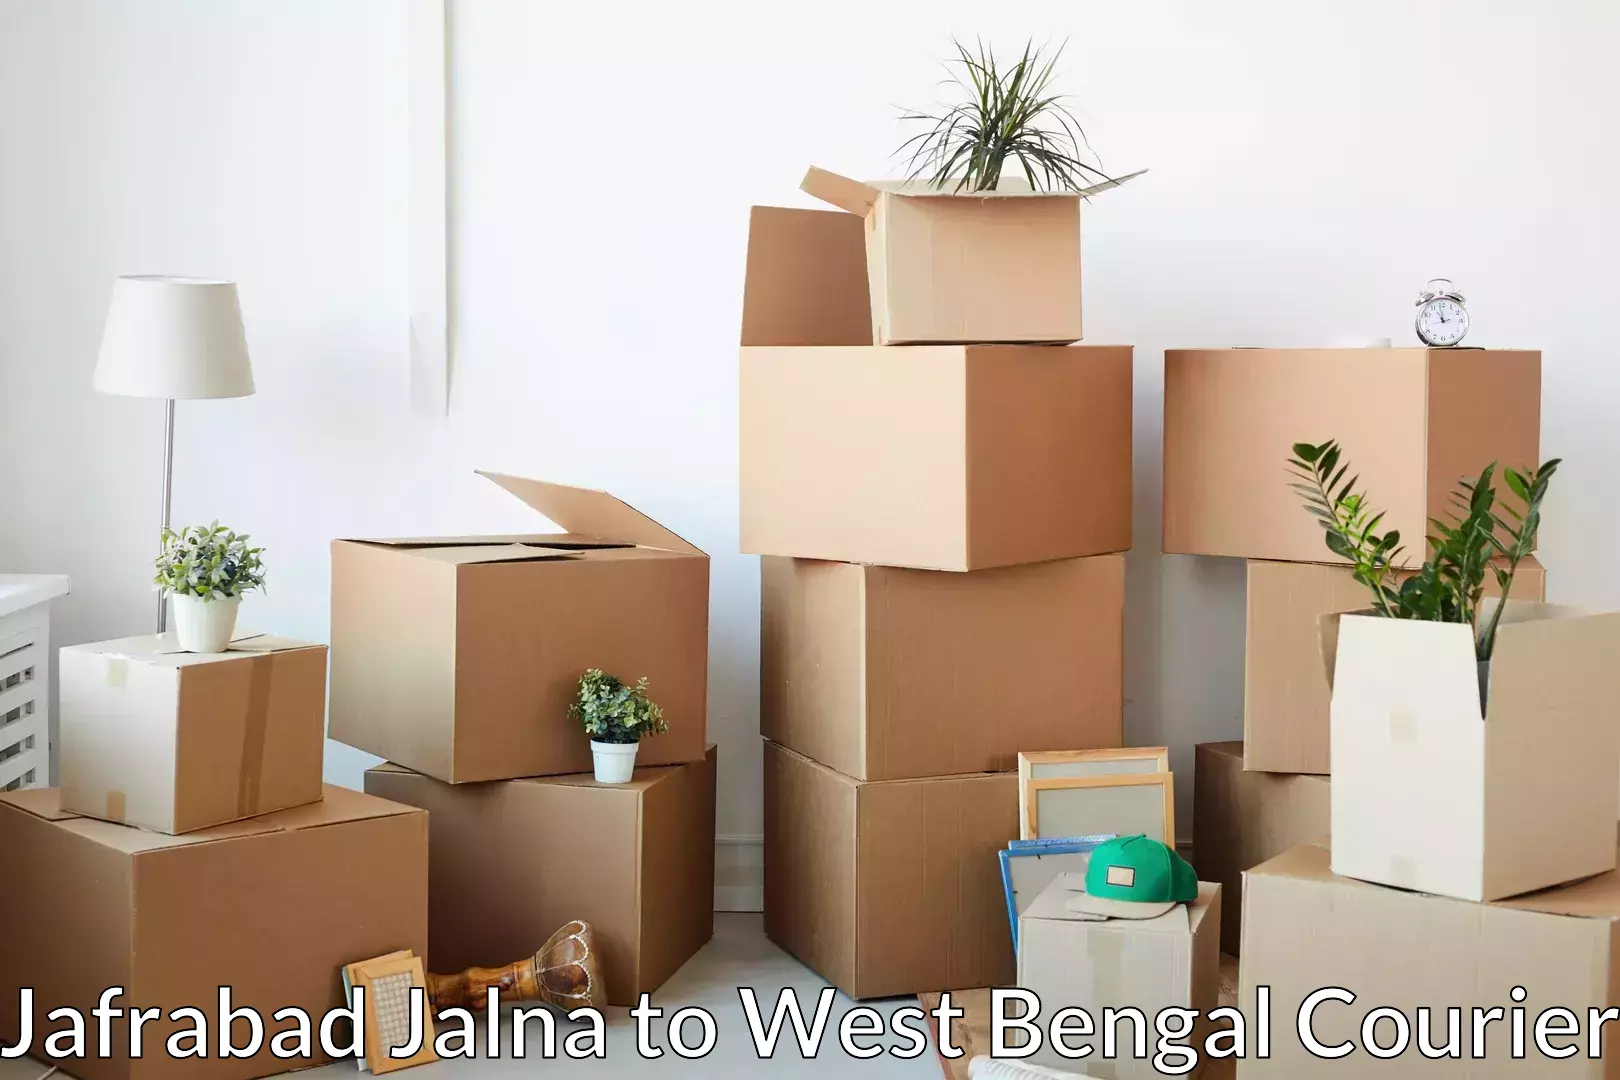 Quality relocation assistance Jafrabad Jalna to West Bengal